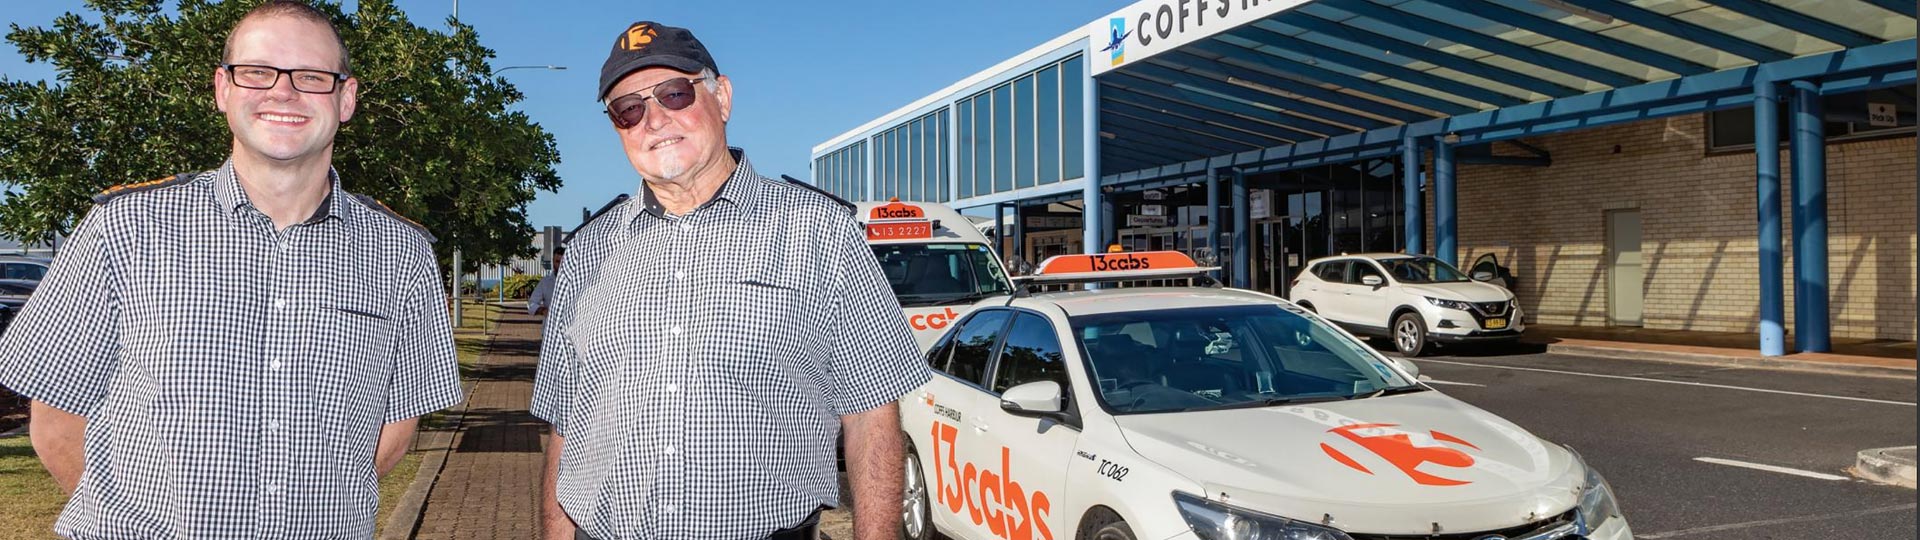 Taxi Driver Positions Vacant | Jobs with 13cabs Coffs Harbour